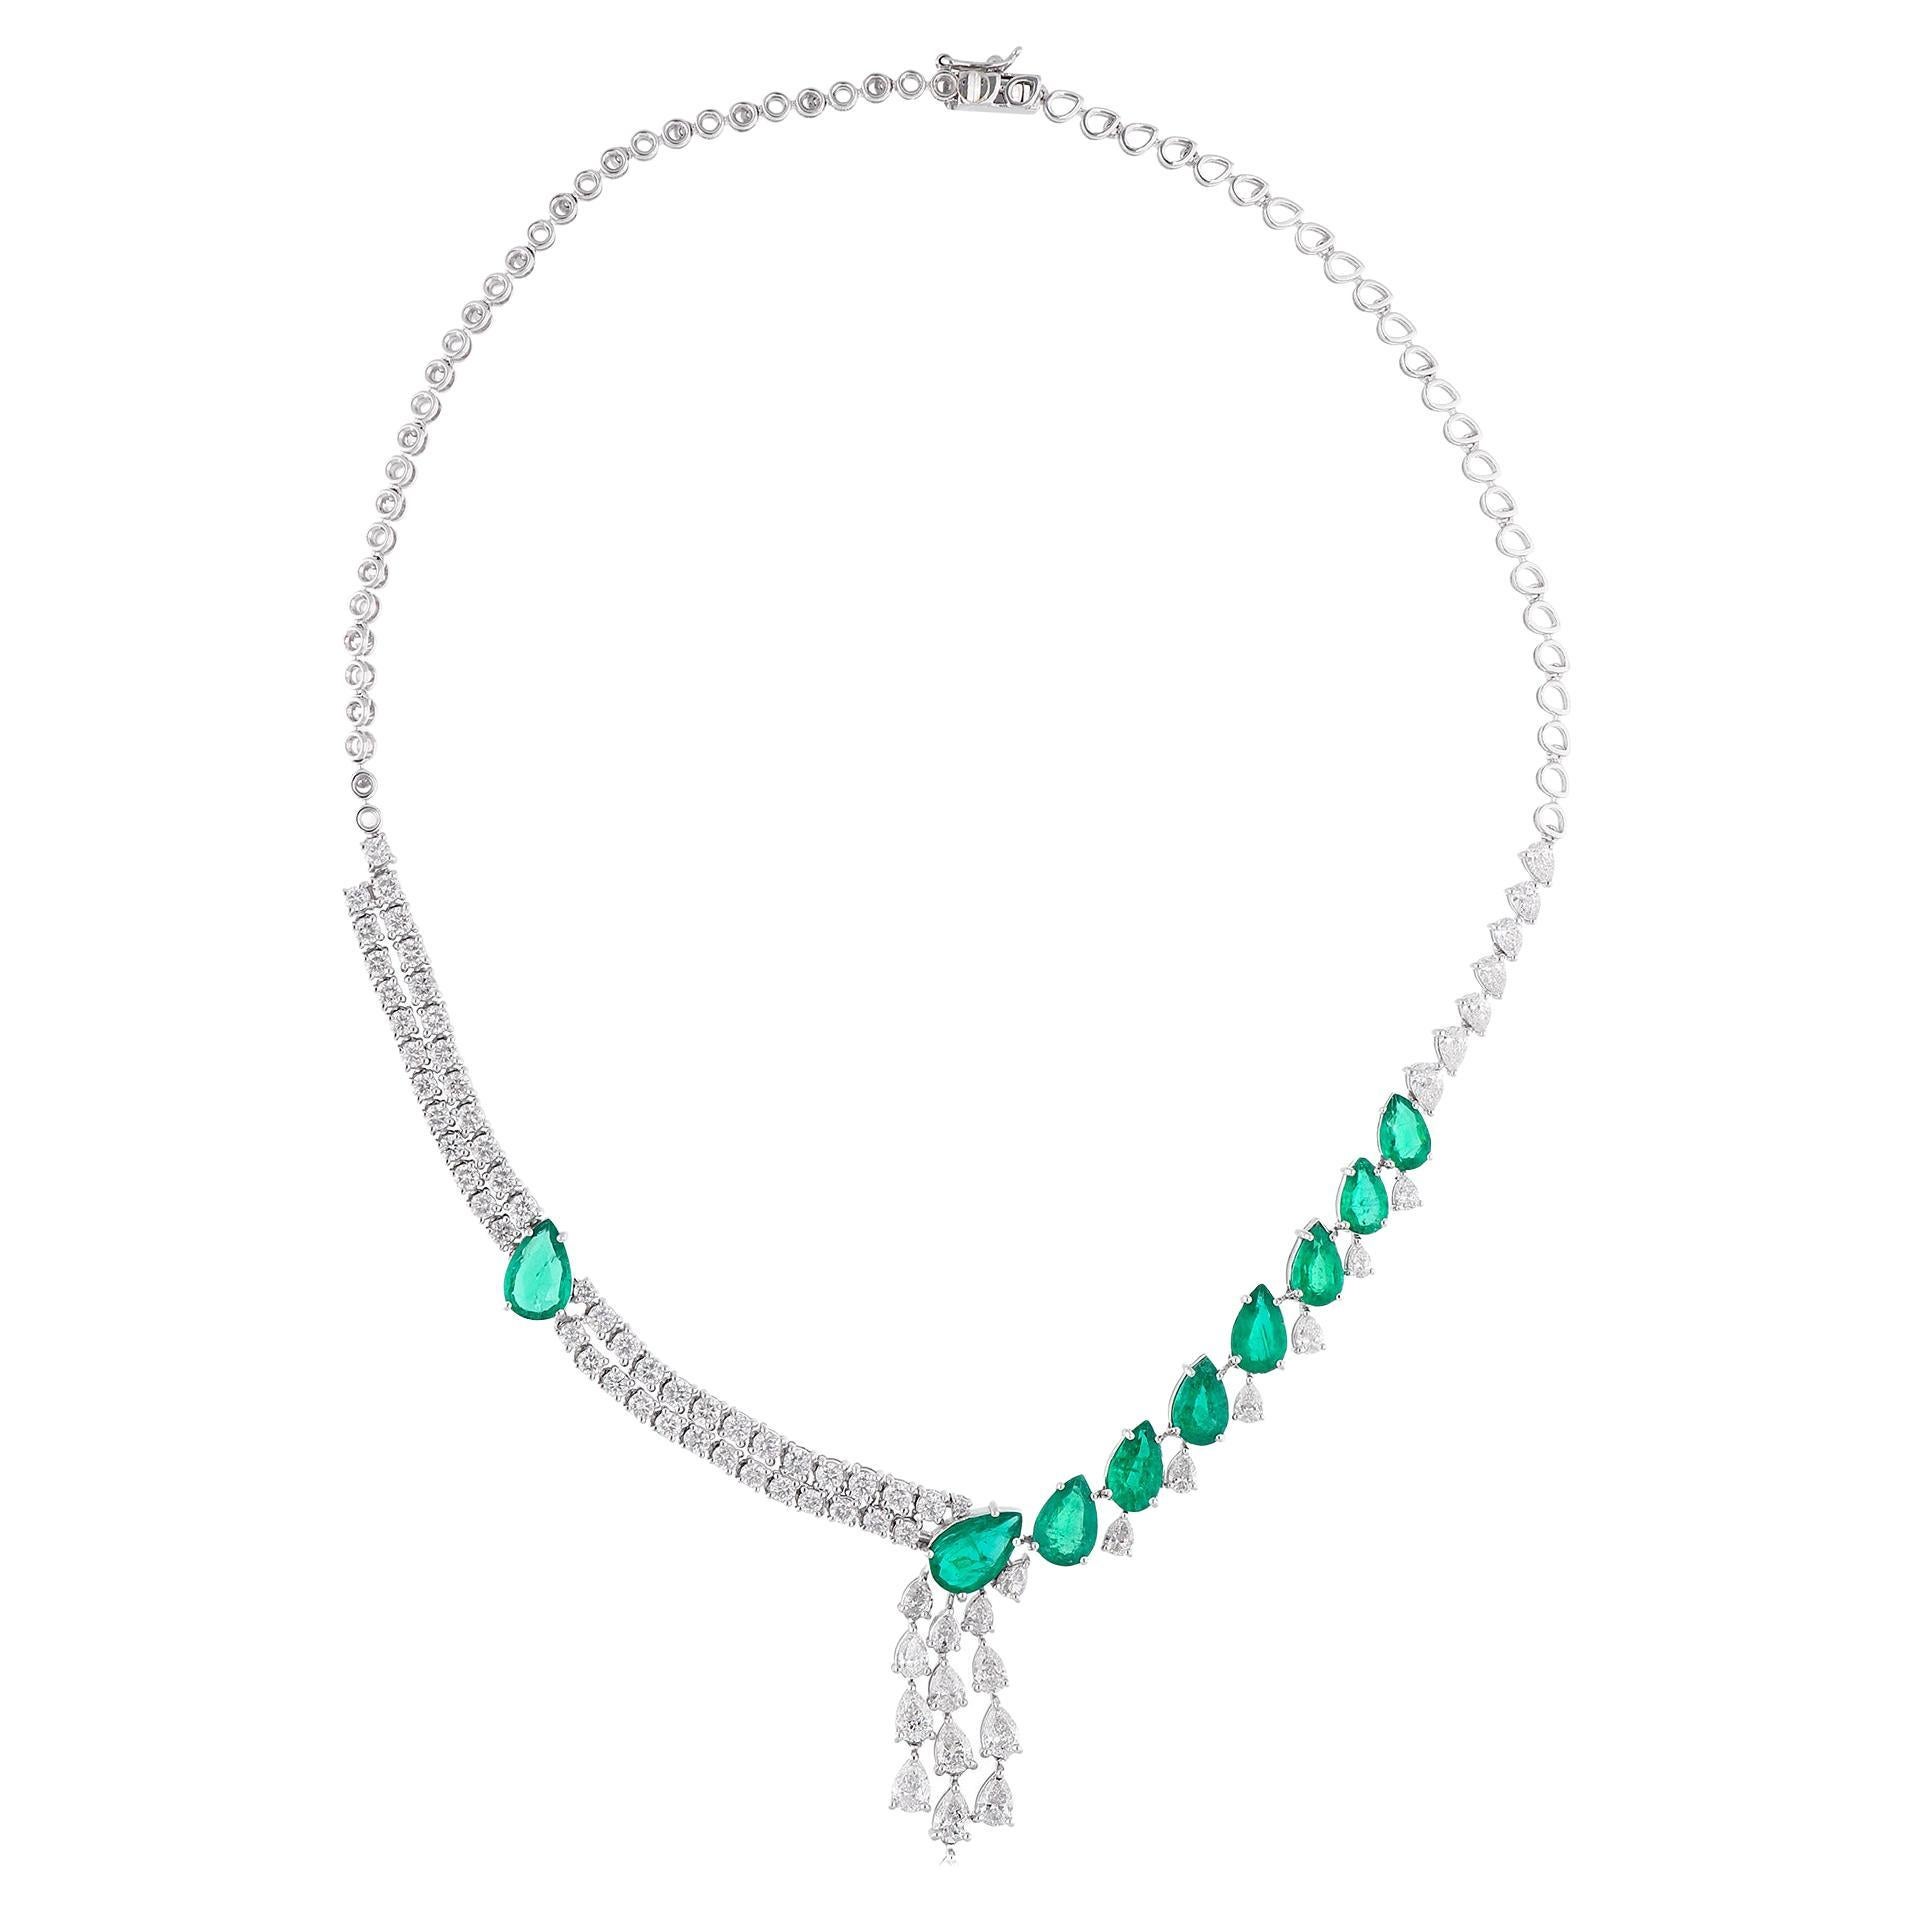 Enhancing the emerald are sparkling diamonds, meticulously set in 18 karat white gold. The diamonds add a touch of brilliance and glamour to the necklace, complementing the radiant green of the emerald. The precise setting of the diamonds showcases